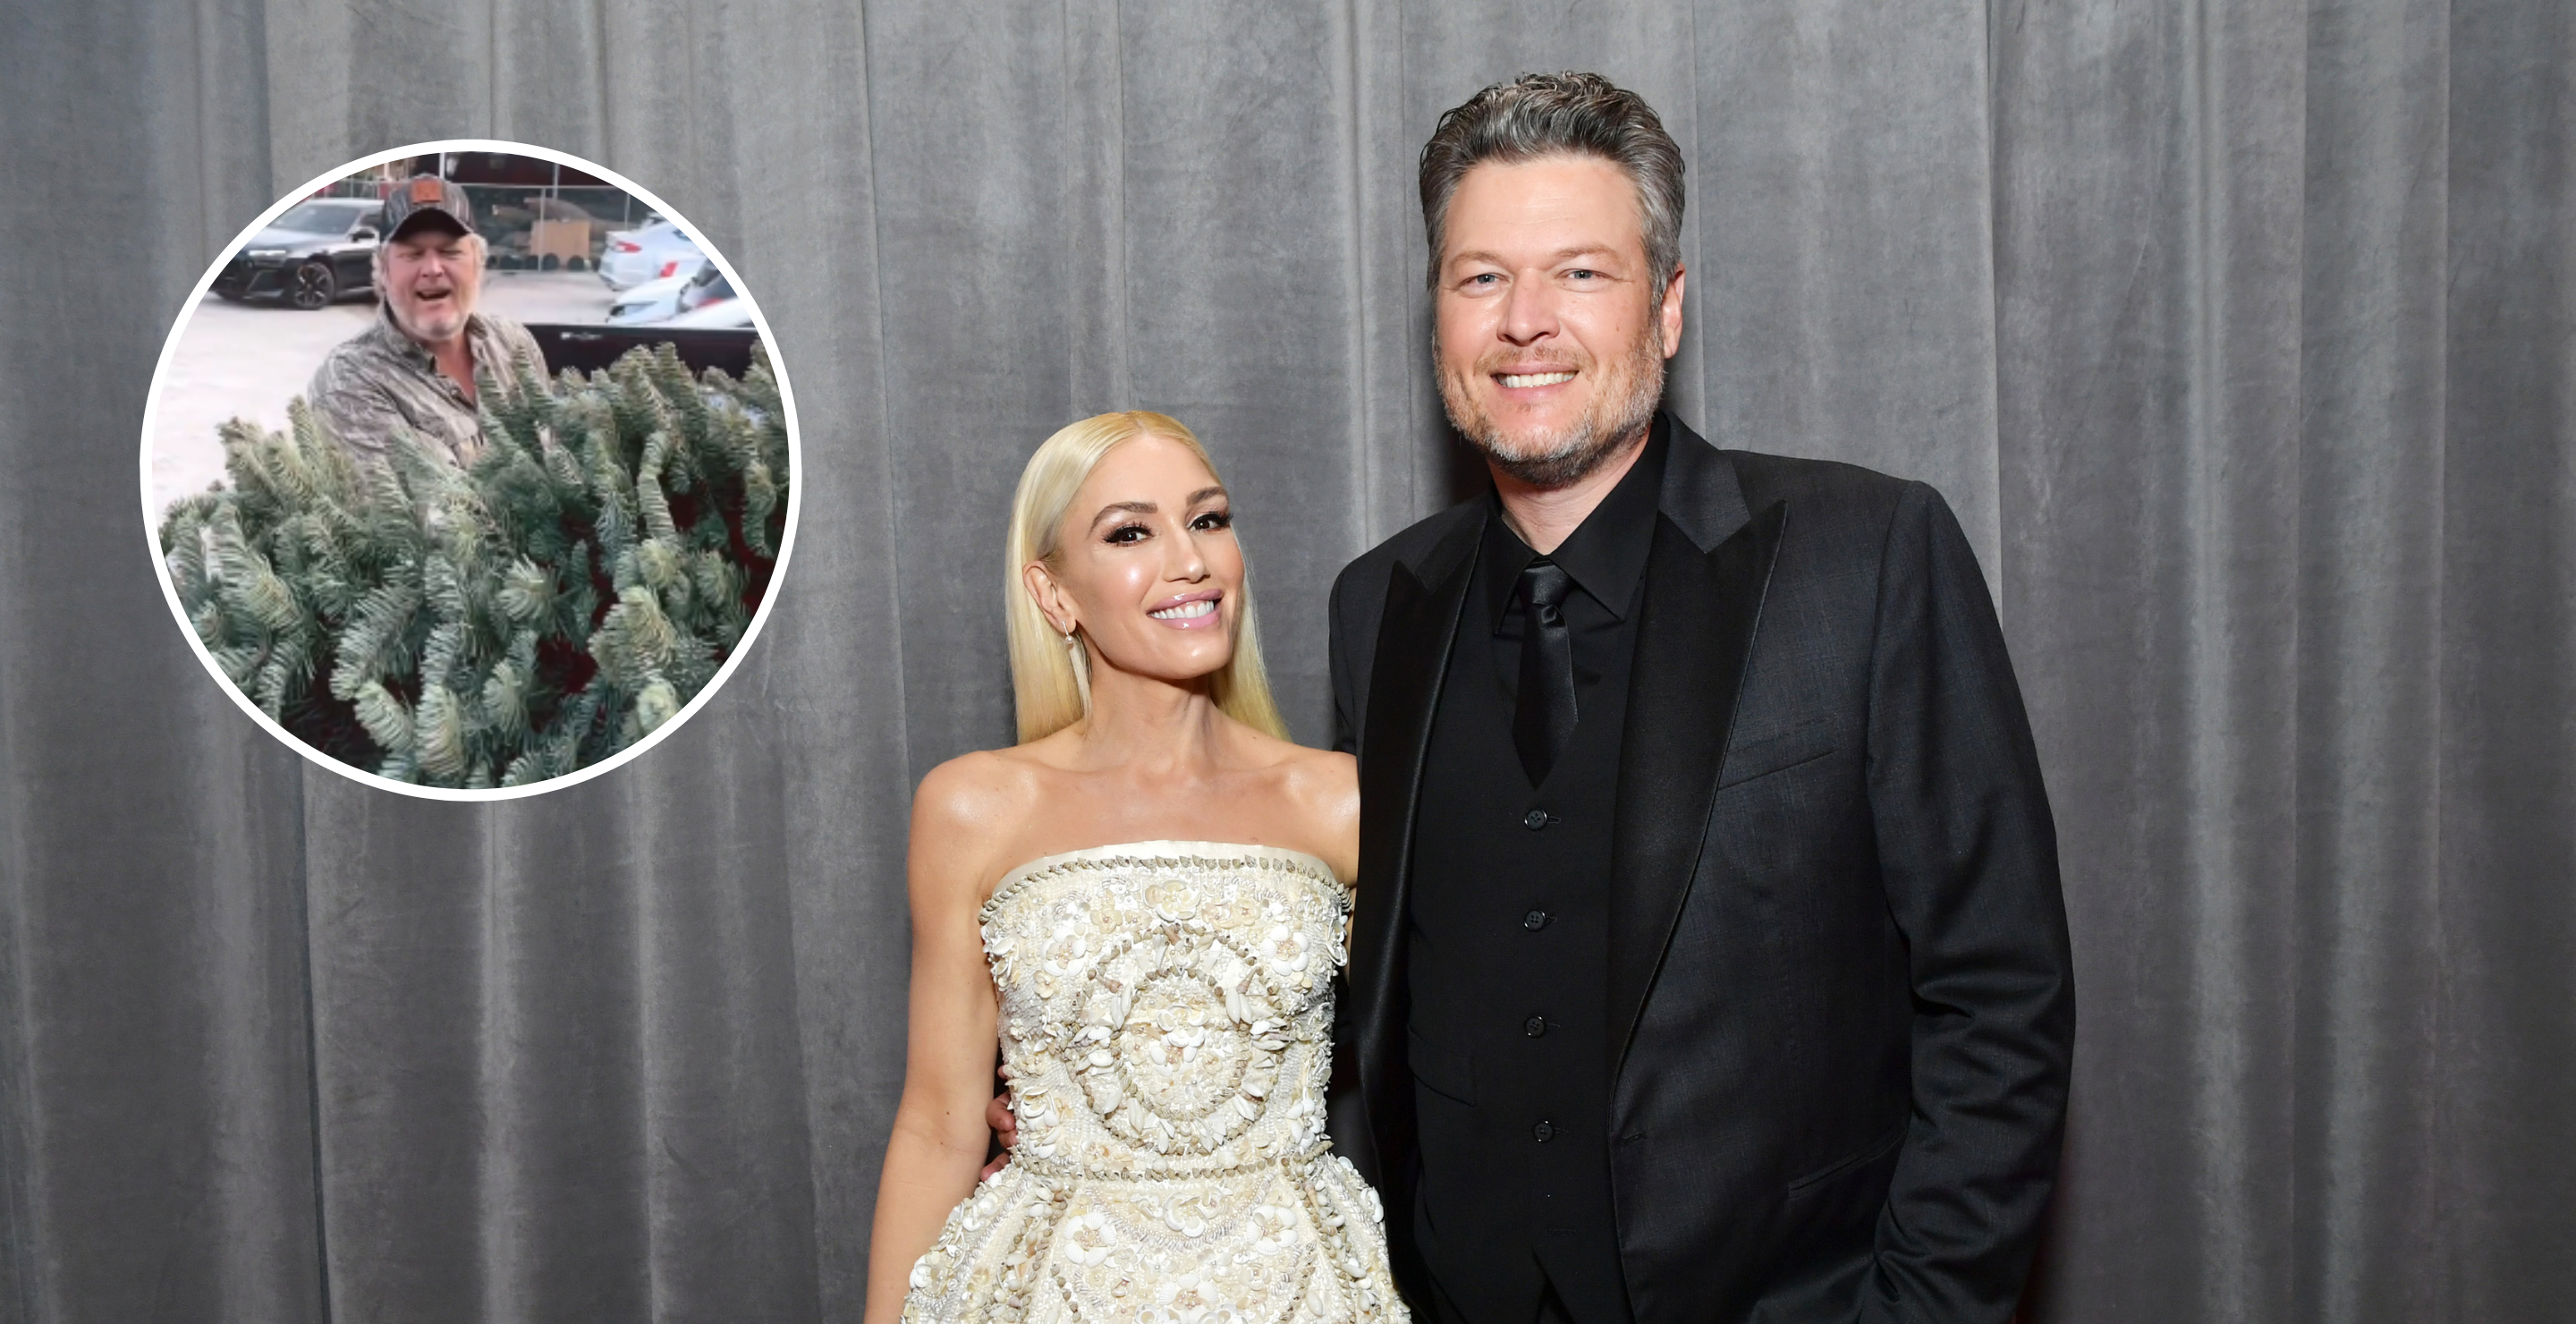 LOS ANGELES, CALIFORNIA - JANUARY 26: (L-R) Gwen Stefani and Blake Shelton attend the 62nd Annual GRAMMY Awards at STAPLES Center on January 26, 2020 in Los Angeles, California and screengrab via Stefani's Instagram.